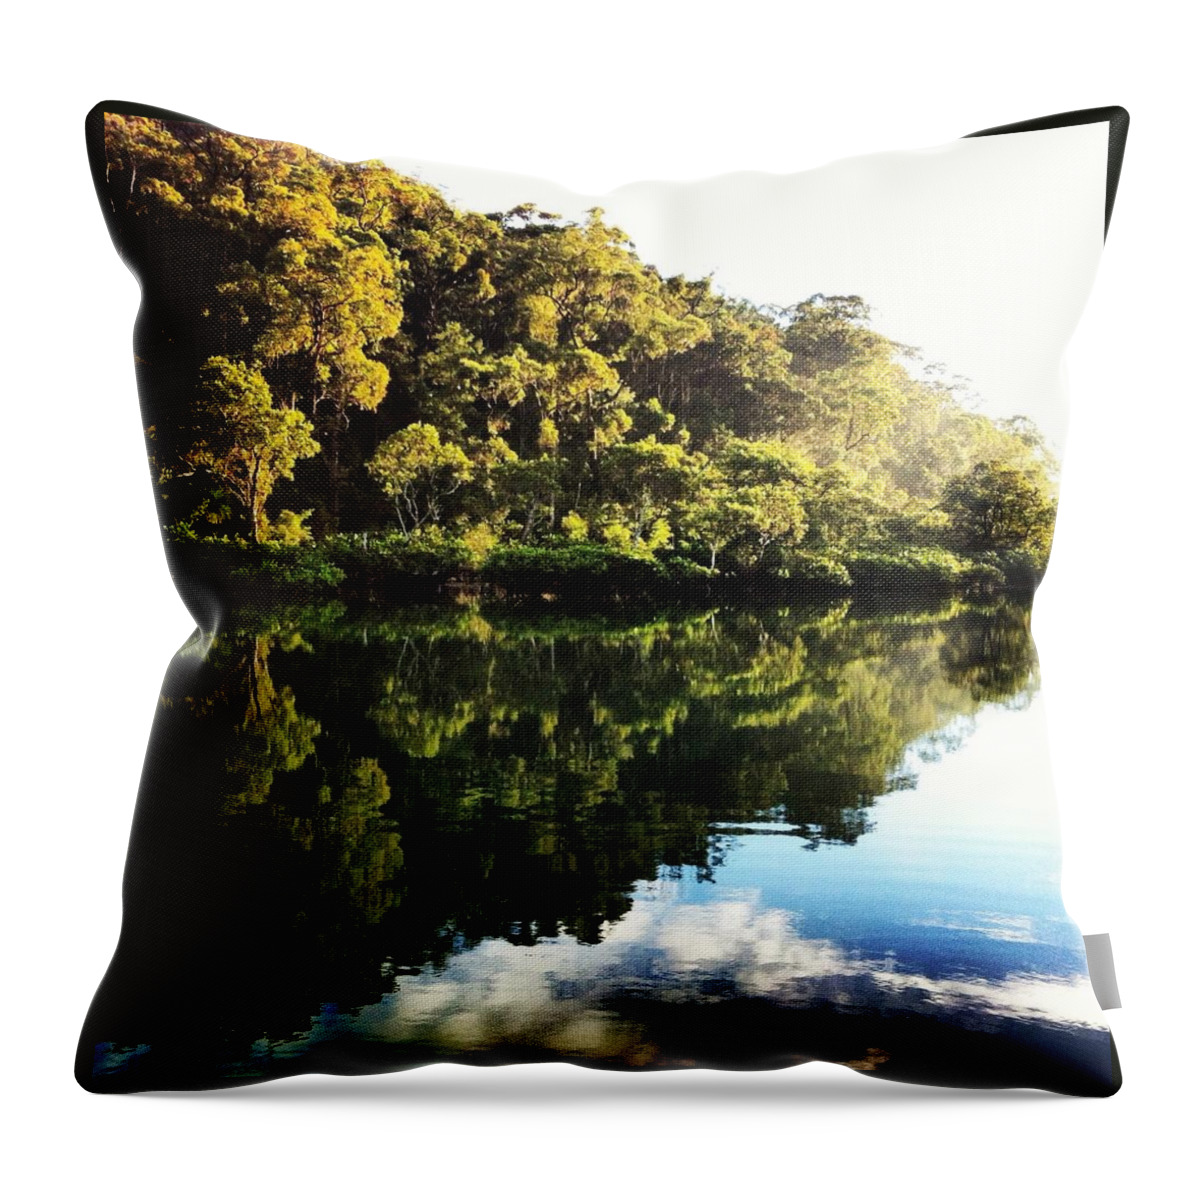 Landscape Throw Pillow featuring the photograph Mirror River by Nic Westaway